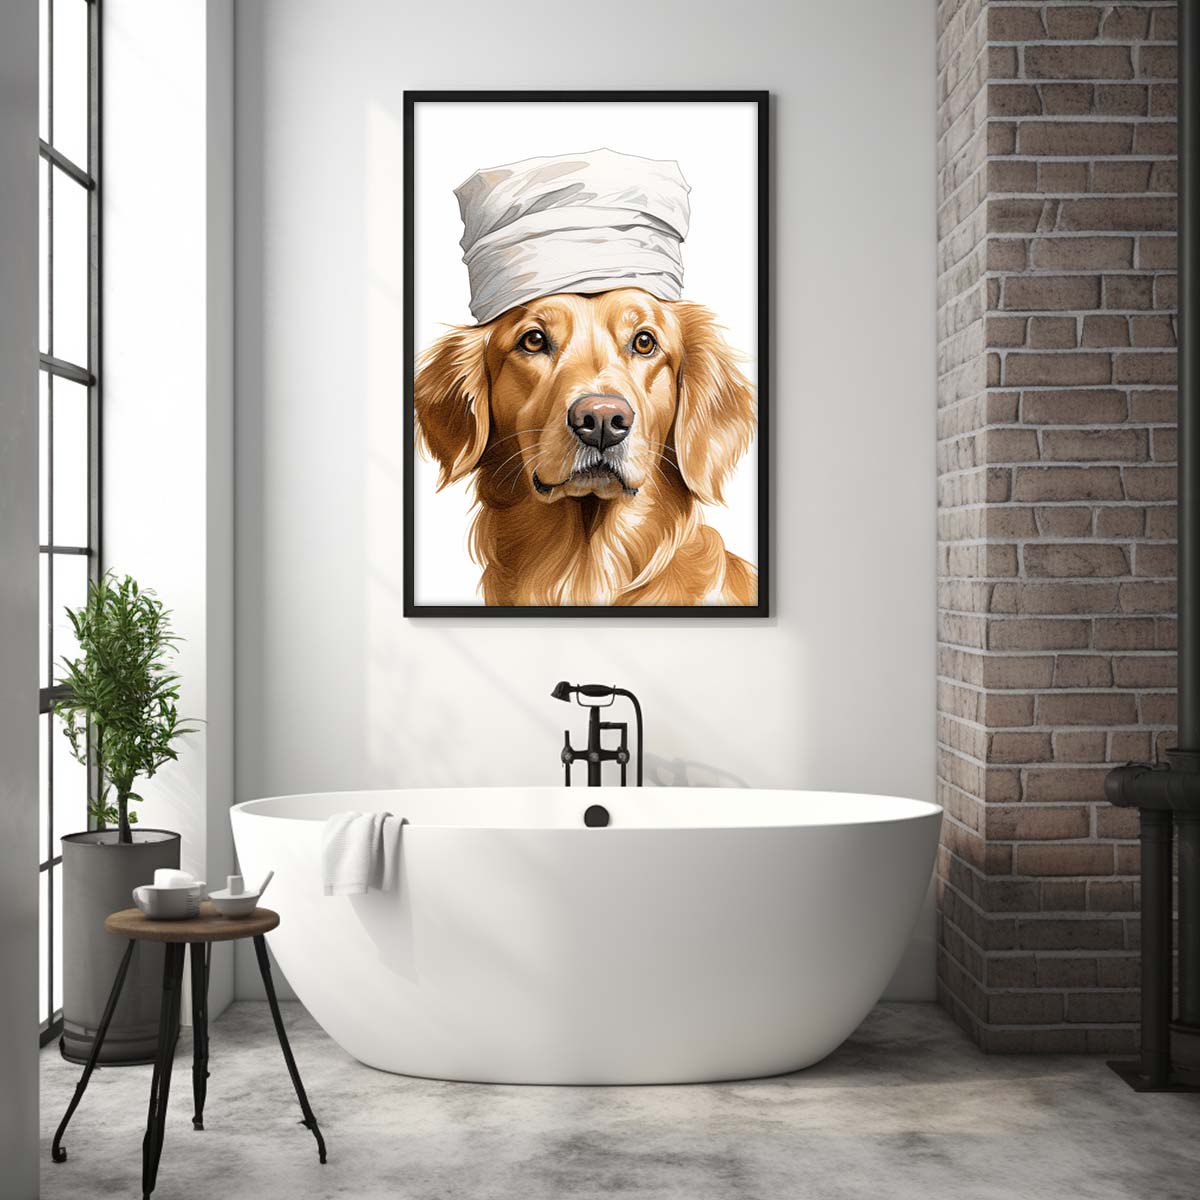 Golden Retriever With Toilet Paper, Canvas Or Poster, Funny Dog Art, Bathroom Wall Decor, Home Decor, Bathroom Wall Art, Dog Wall Decor, Animal Decor, Pet Gift, Pet Illustration, Digital Download